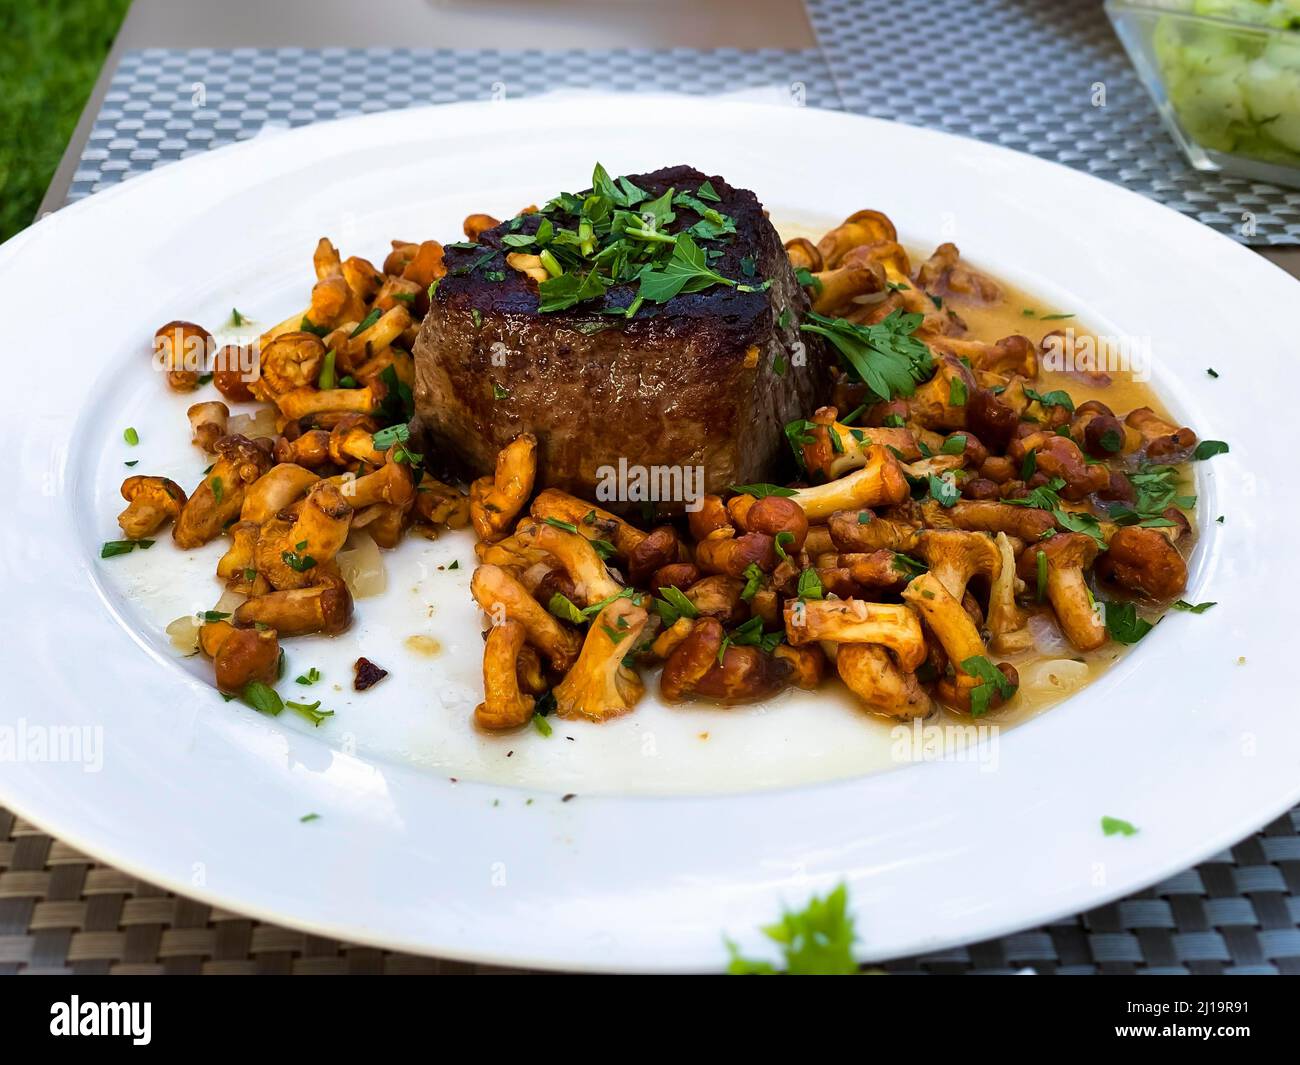 Fillet steak with chanterelles and parsley Stock Photo